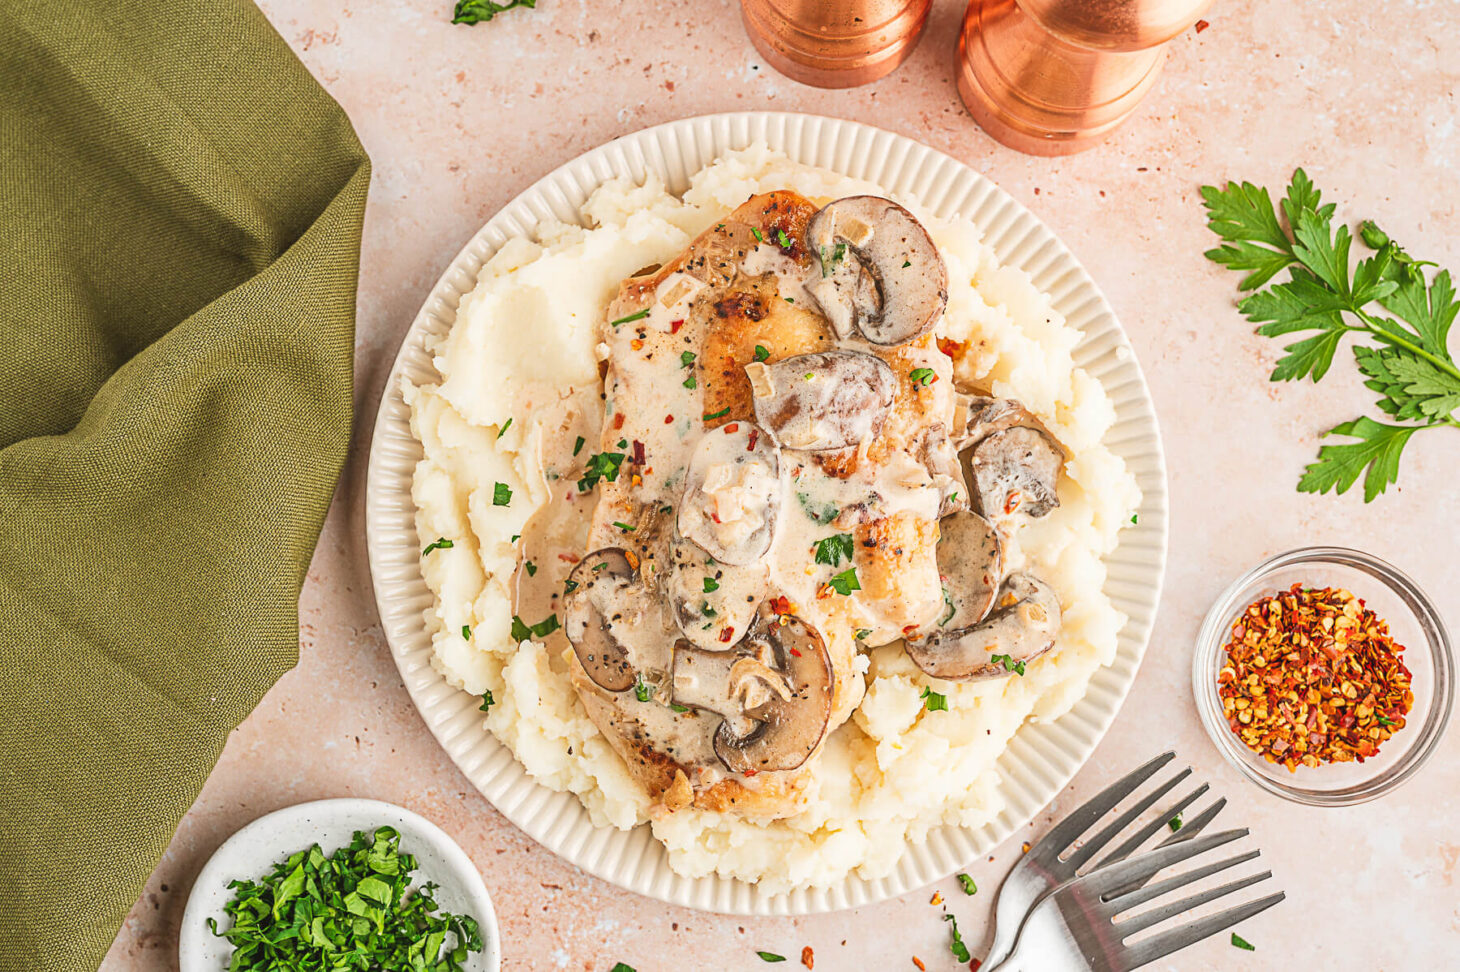 A serving of creamy chicken marsala featuring a whole chicken breast topped with mushrooms and creamy sauce over a bed of mashed potatoes.